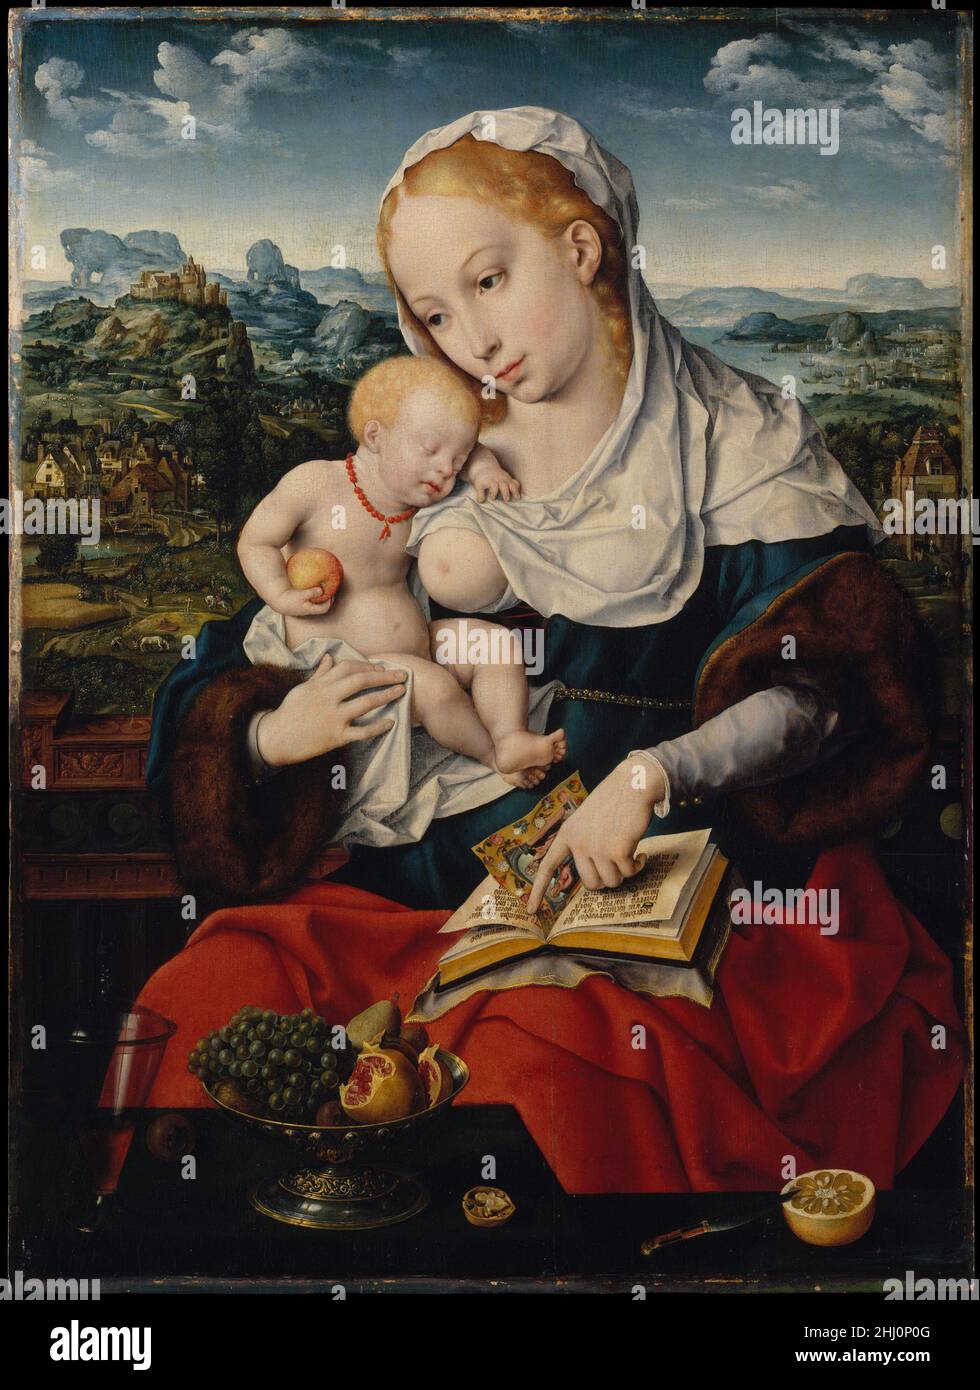 Virgin and Child ca. 1525 Joos van Cleve Netherlandish Two iconographic themes are combined in this splendid painting: the joys of motherhood and the sorrowful premonition of Christ's death. The sleeping infant is traditionally understood as a prefiguration of the dead Christ embraced by the Virgin, known as the Pietà. Contemplating her devotional reading, Mary points to her prayer book, in which two pages are legible. Taken from the Magnificat (Luke 1:54–55), celebrating the Annunciation, and the De Profundis (Psalm 130:1–2), used in the Mass for the dead, the verses foreshadow the Virgin’s r Stock Photo